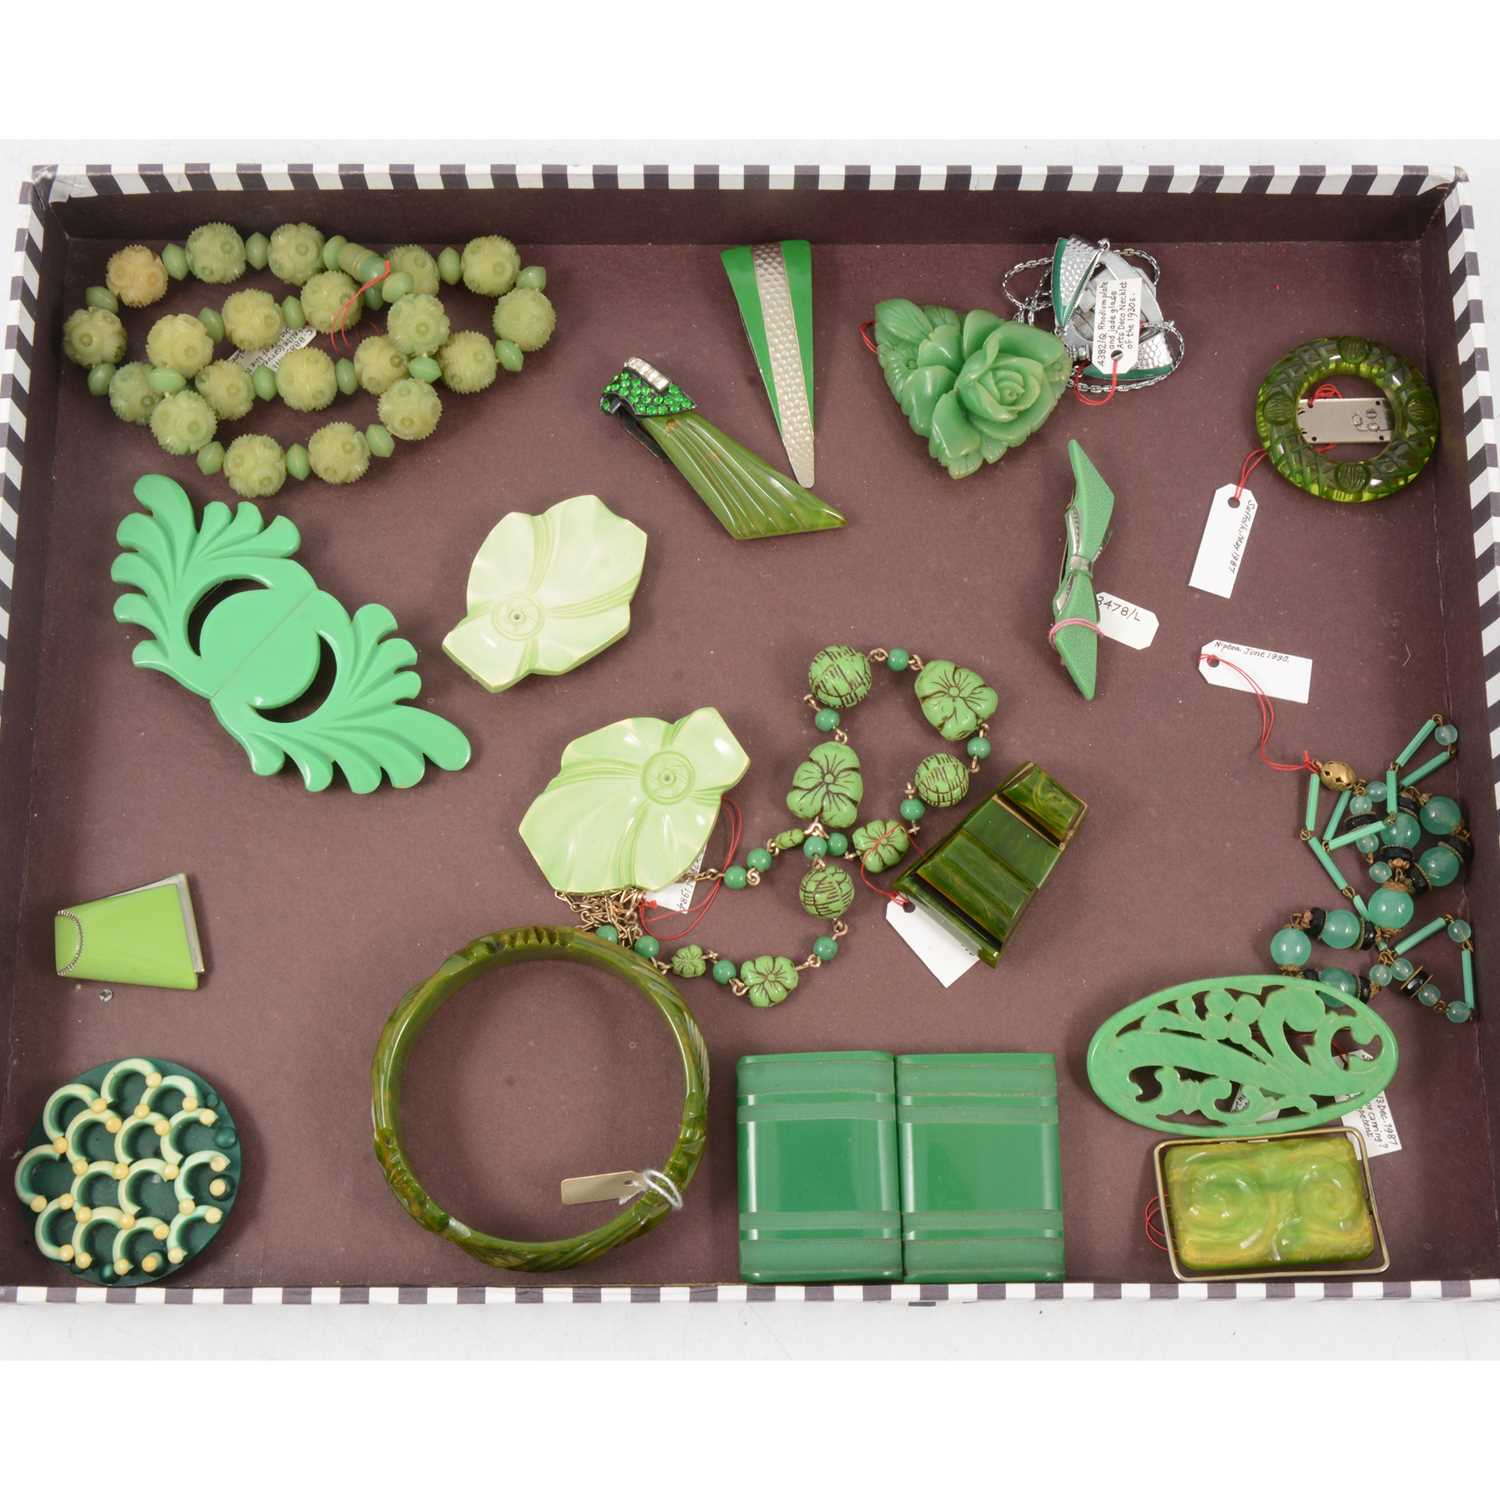 Lot 398 - One tray of vintage bakelite and celluloid jewellery with a green tone.